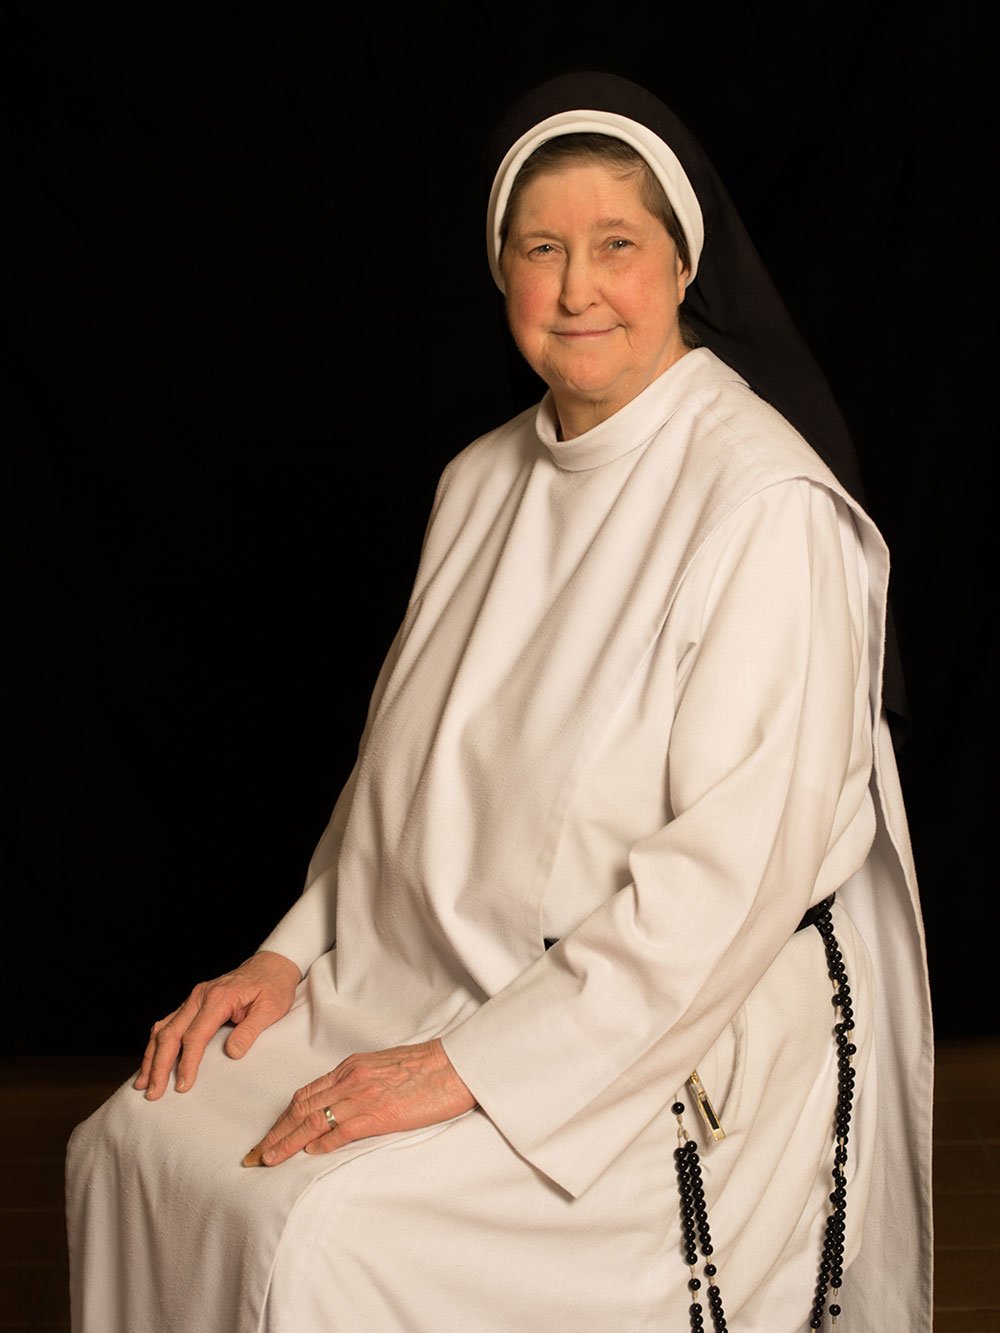 Sister Joan Marie, 66: 24 years with the Hawthorne Dominicans